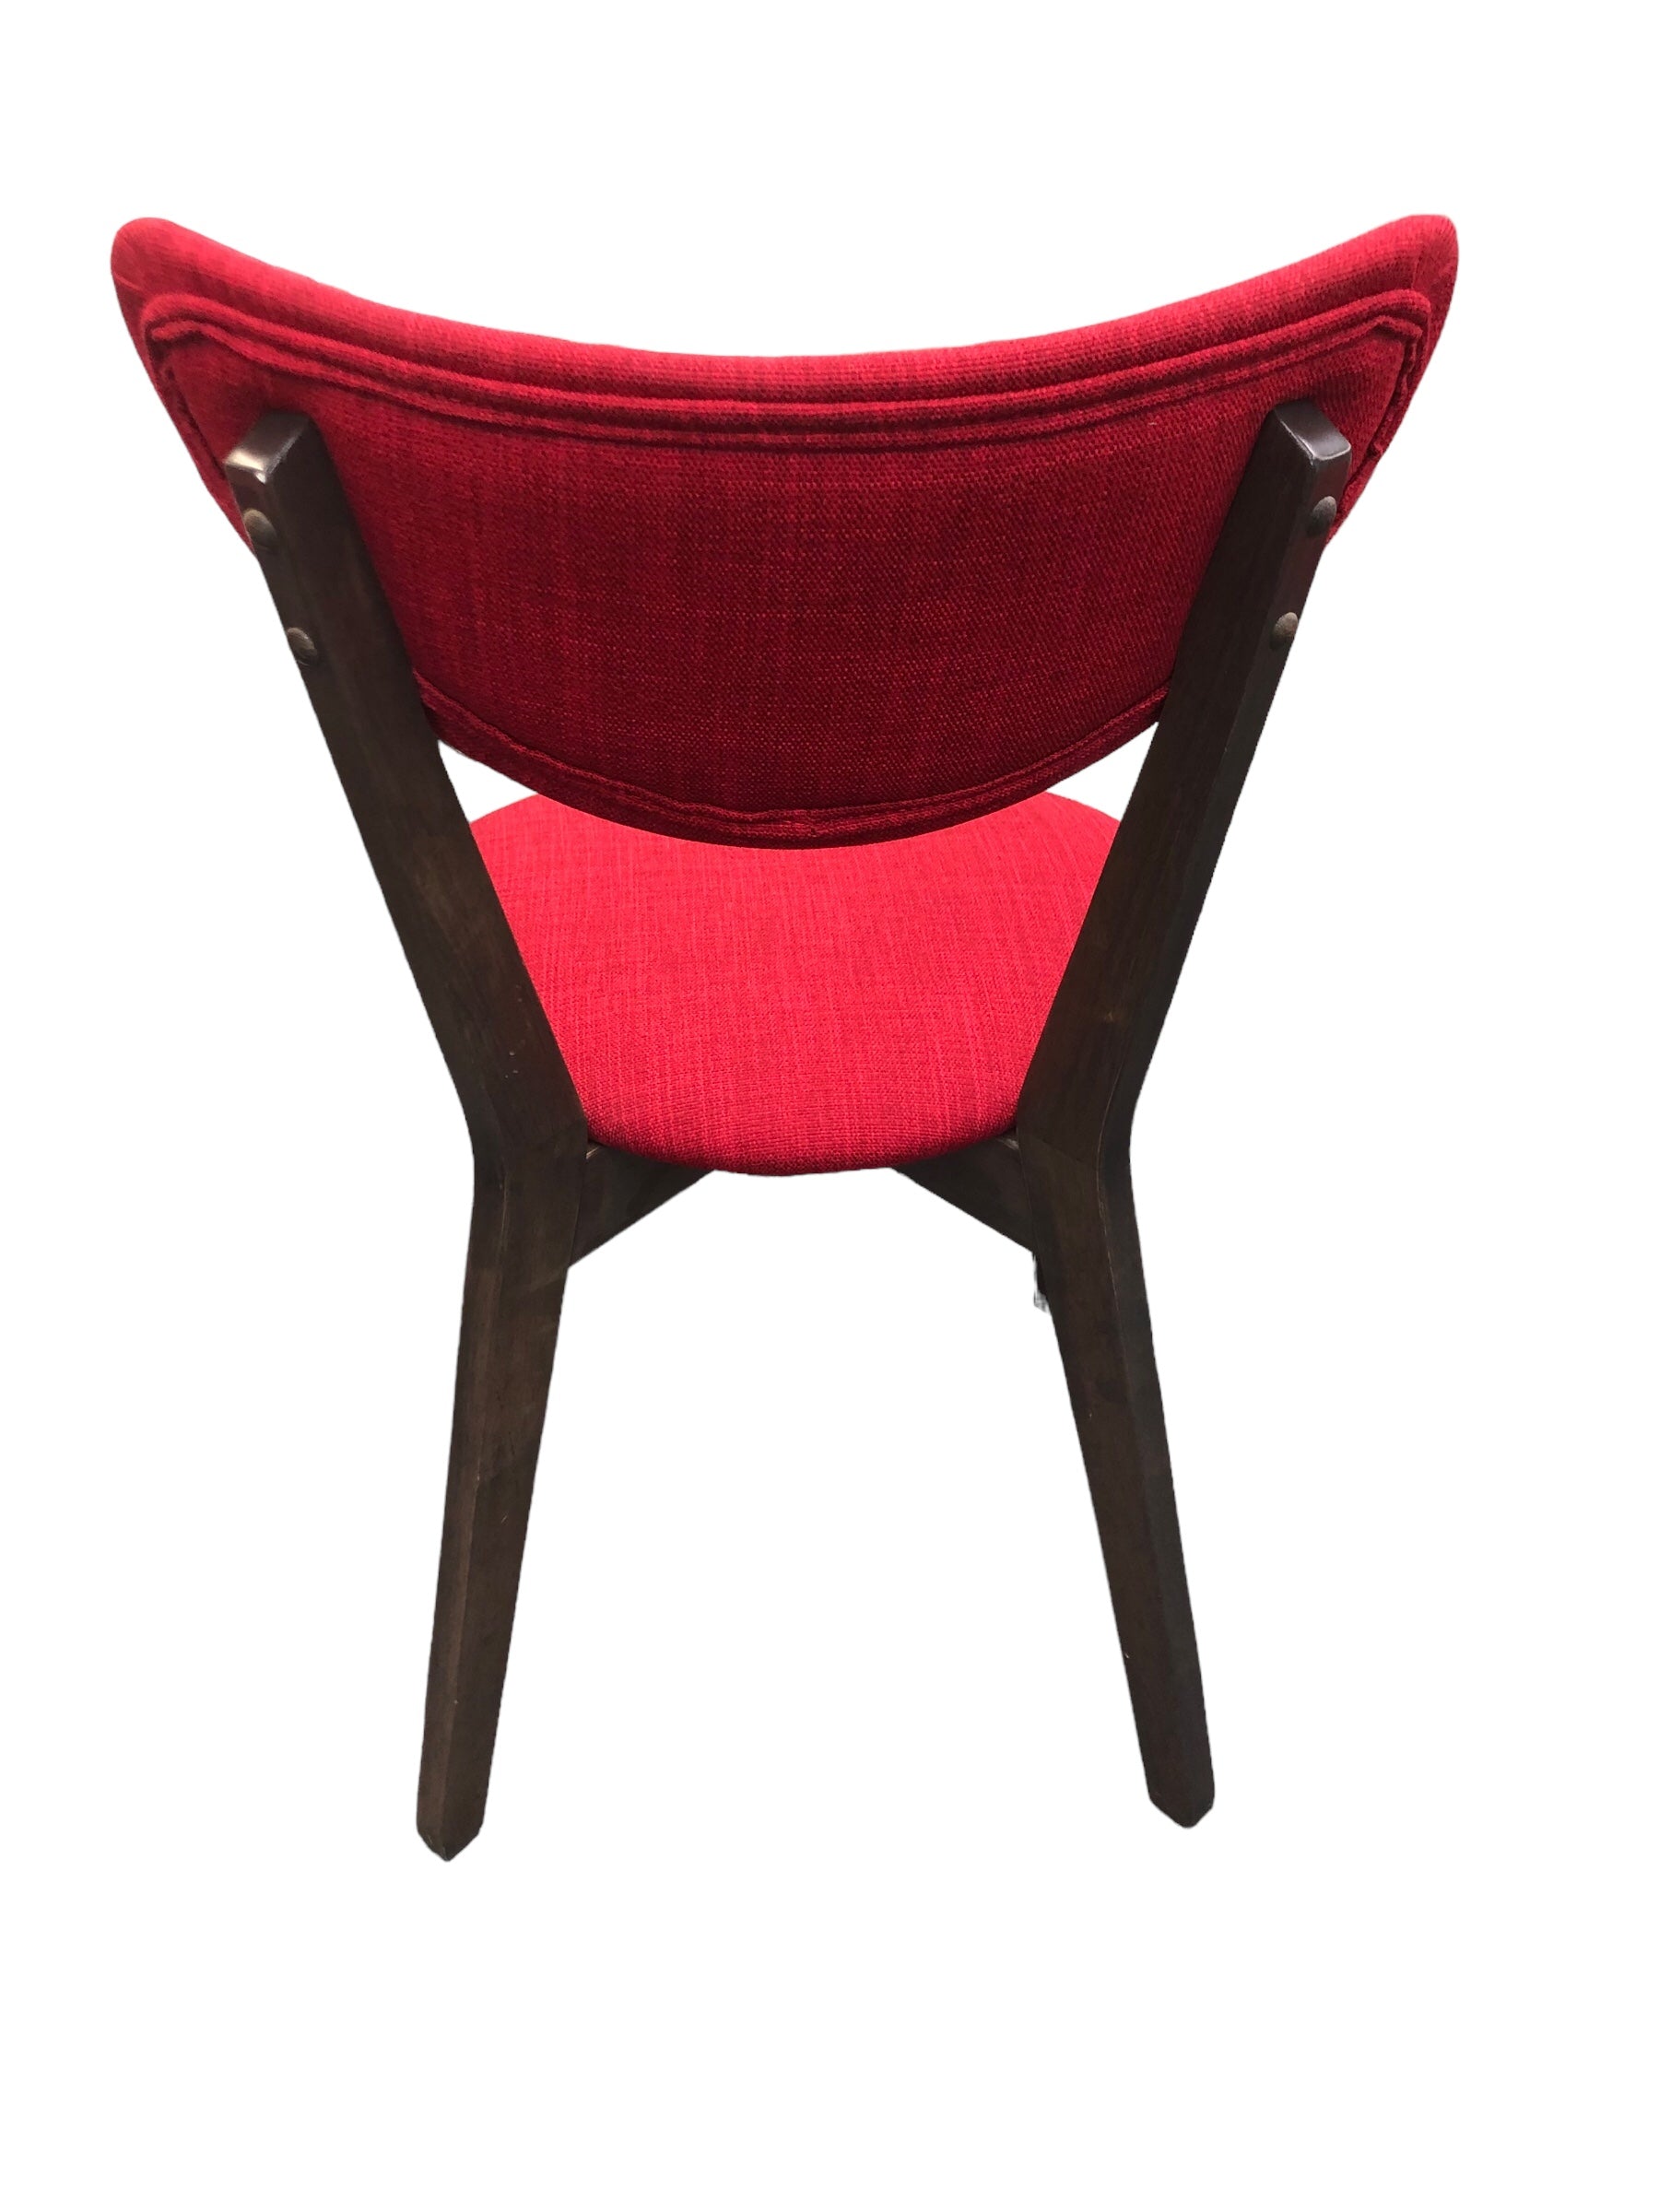 Red Fabric and wood Chairs